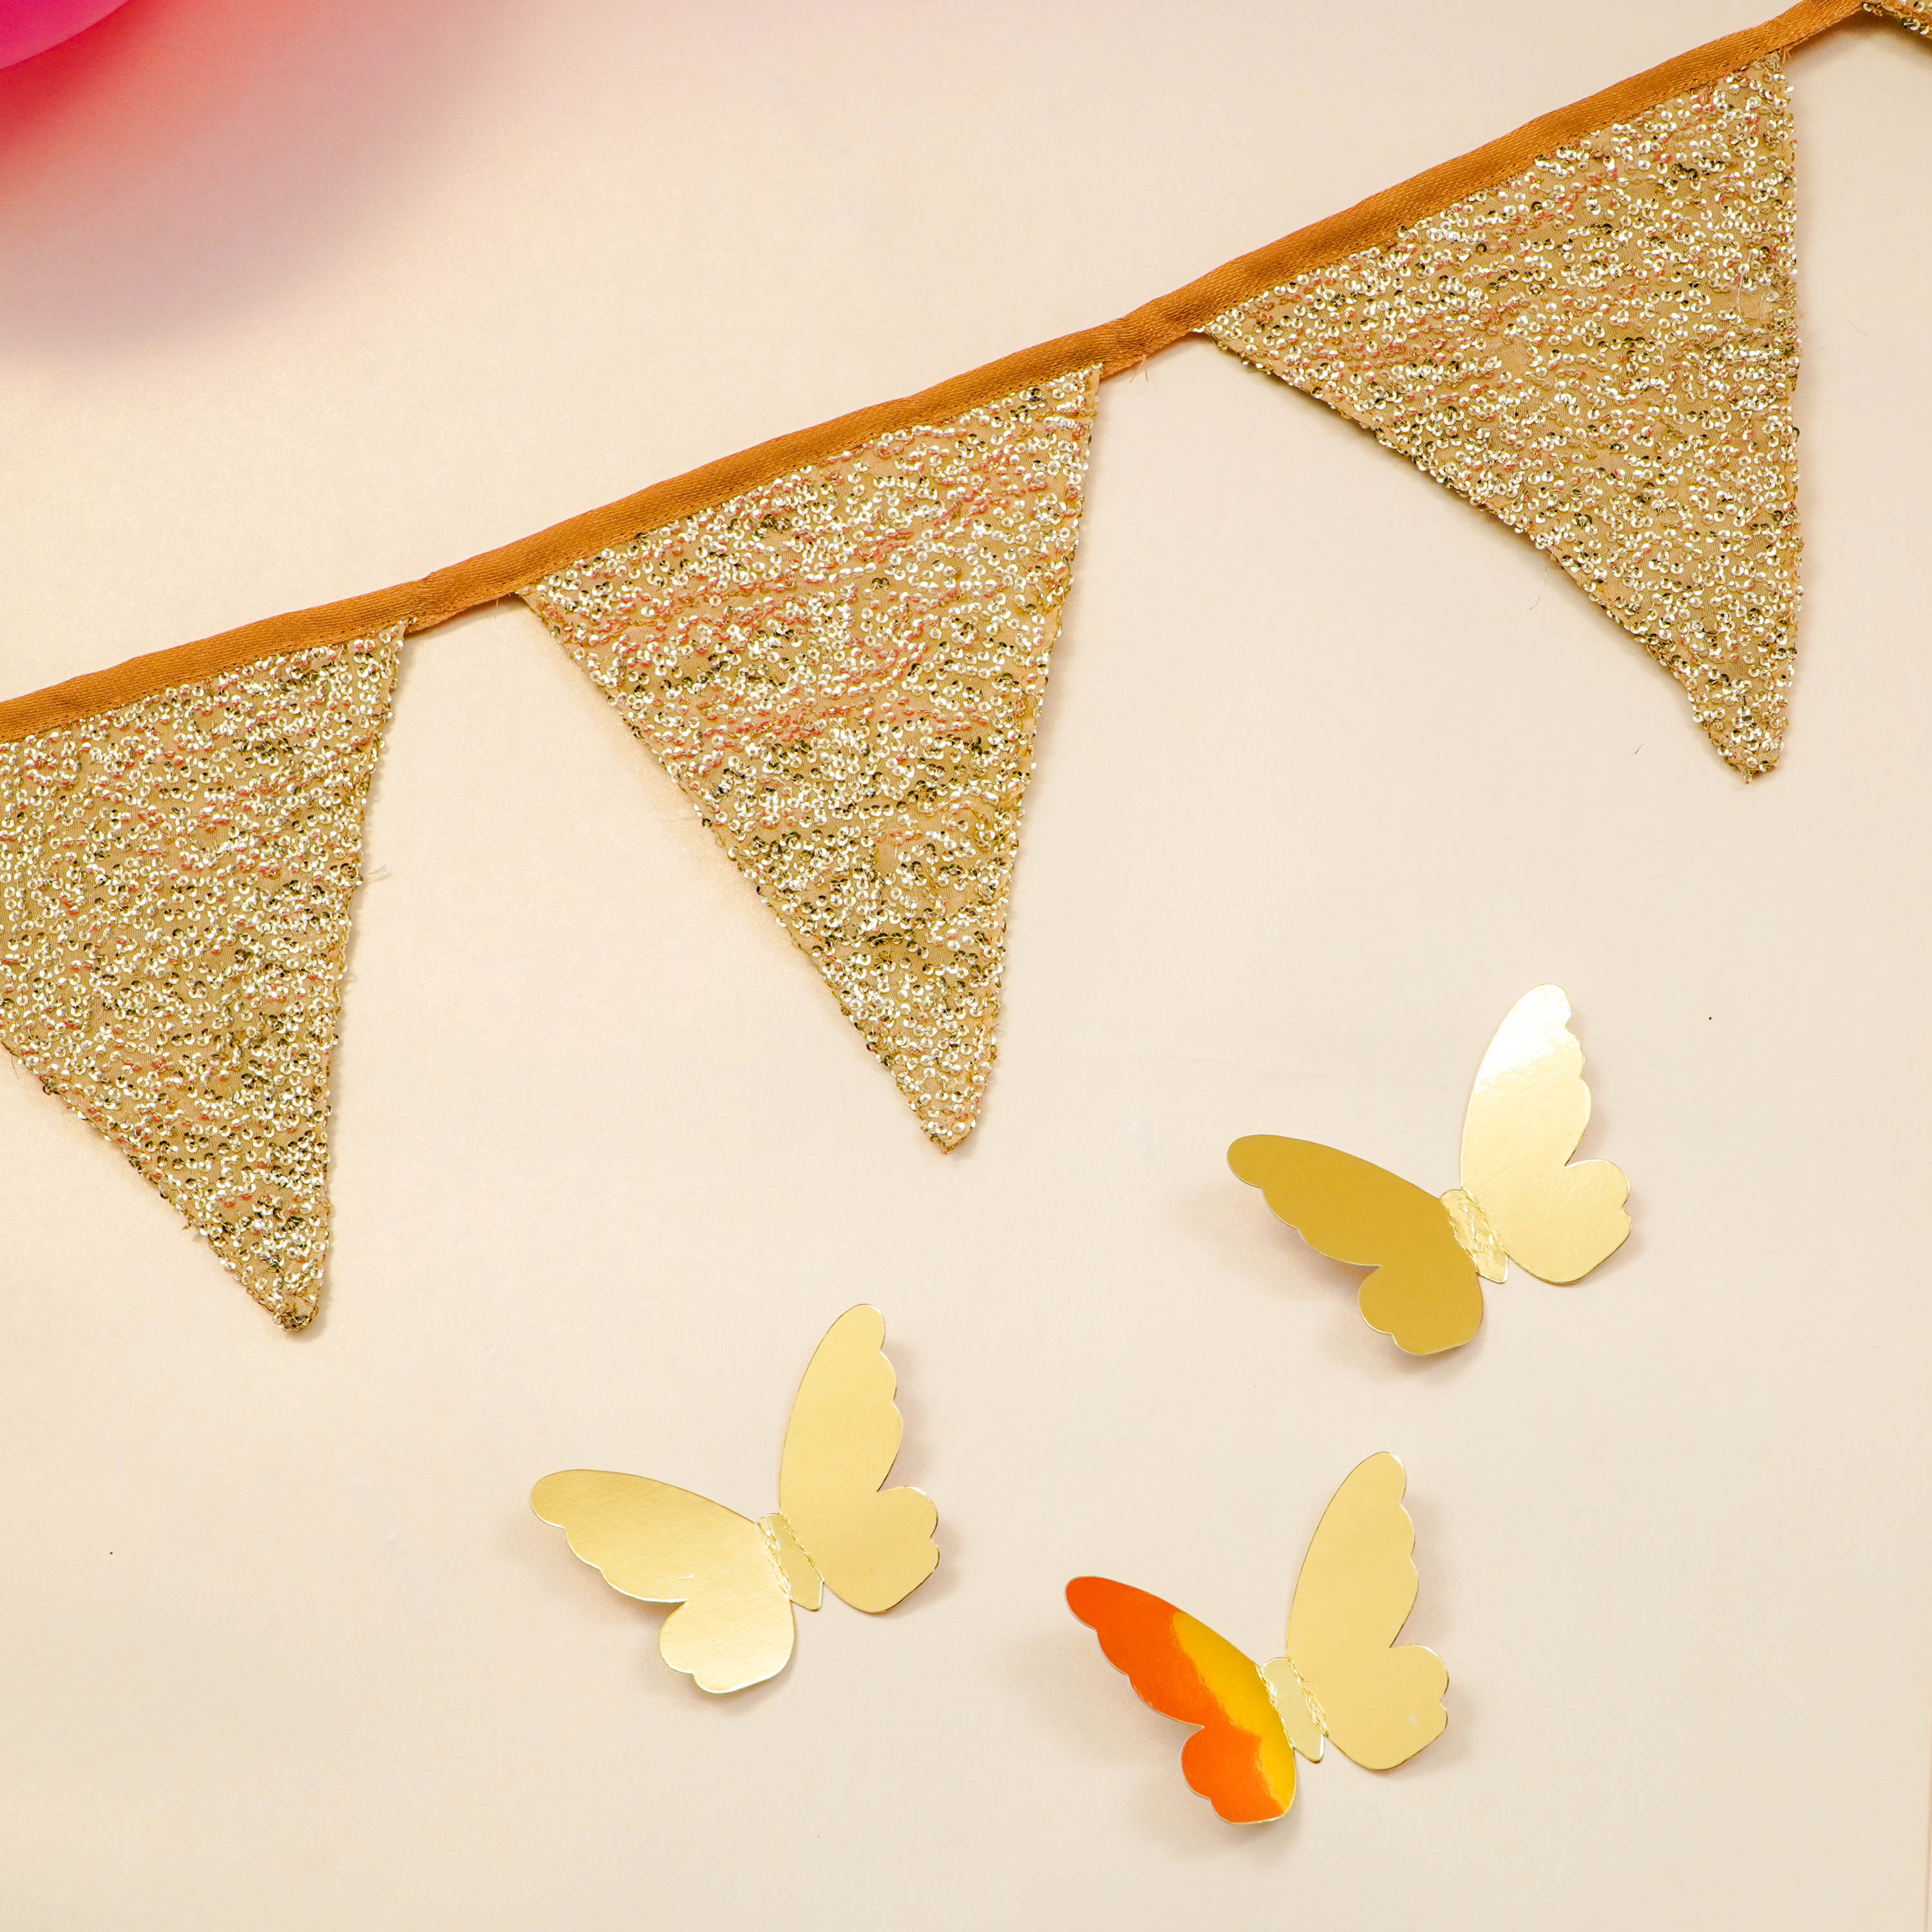 Butterfly Garland, Butterfly Decorations, Butterfly Nursery Decor, Butterly  Baby Shower, Pink Butterfly, Butterfly Party Decorations 